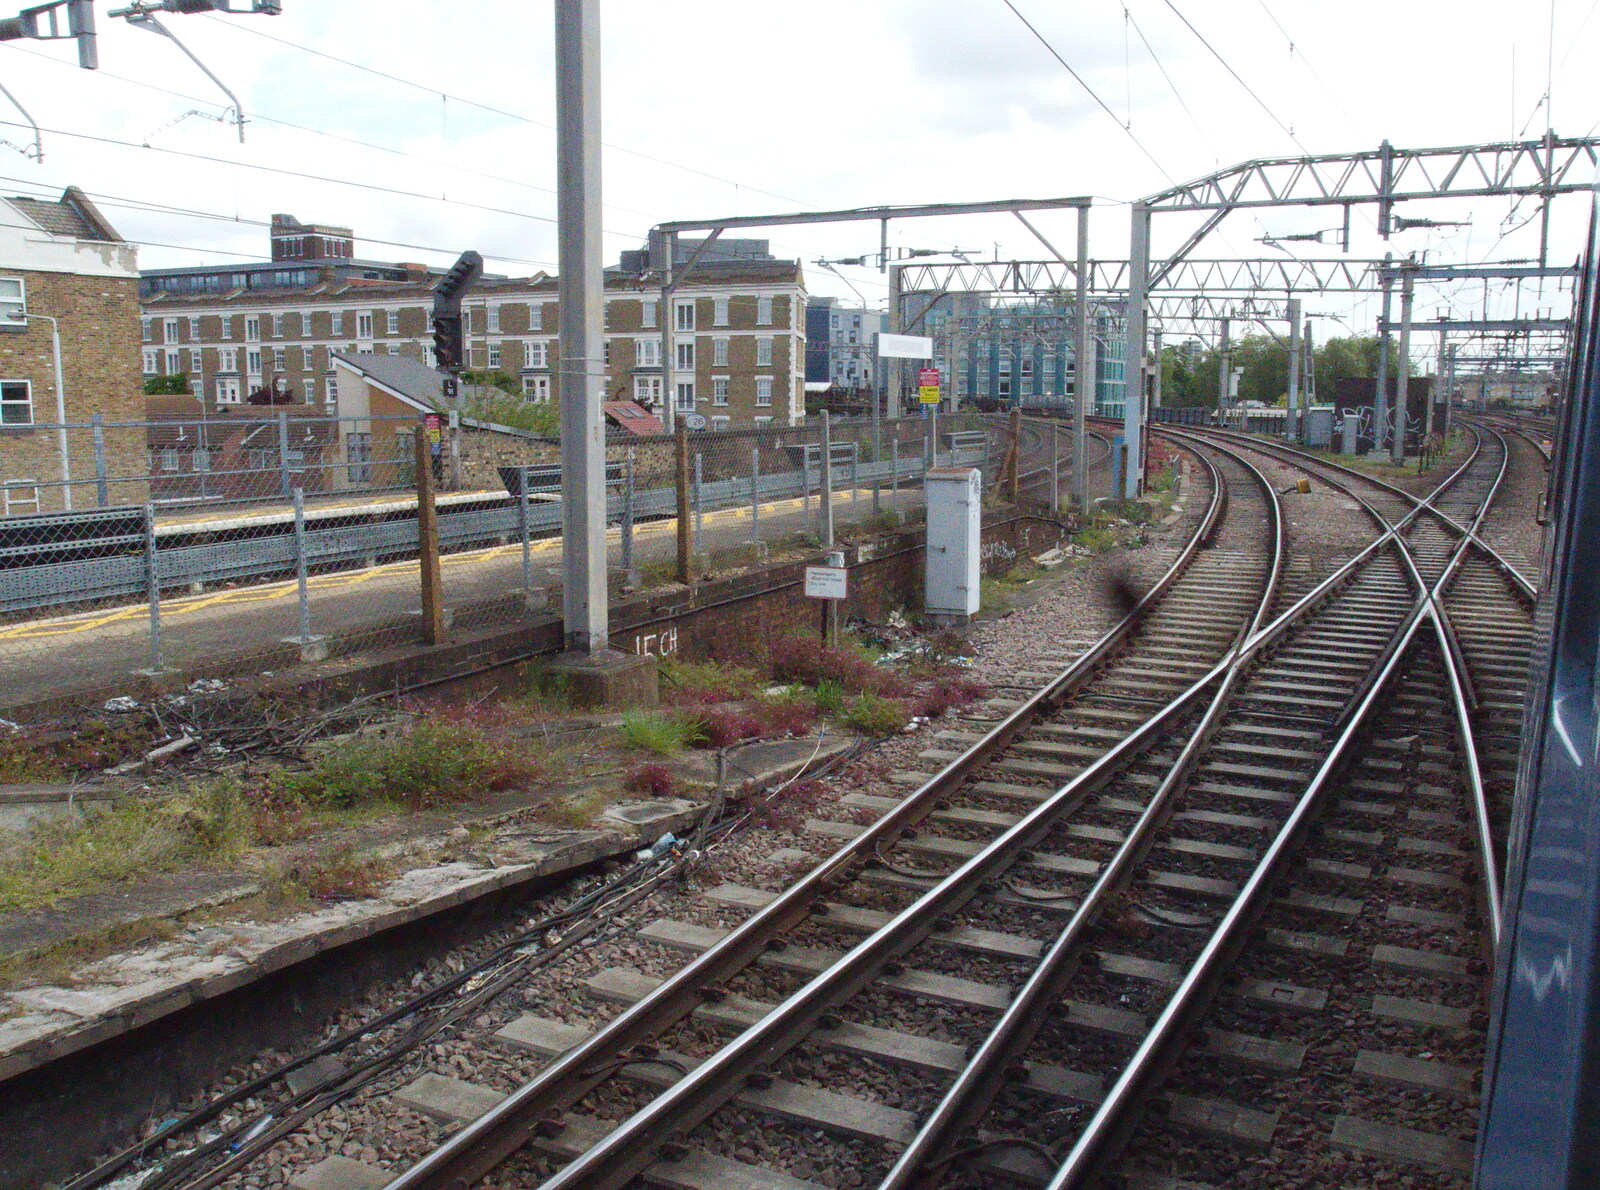 Bethnal Junction on the railway from A May Miscellany, London - 8th May 2014